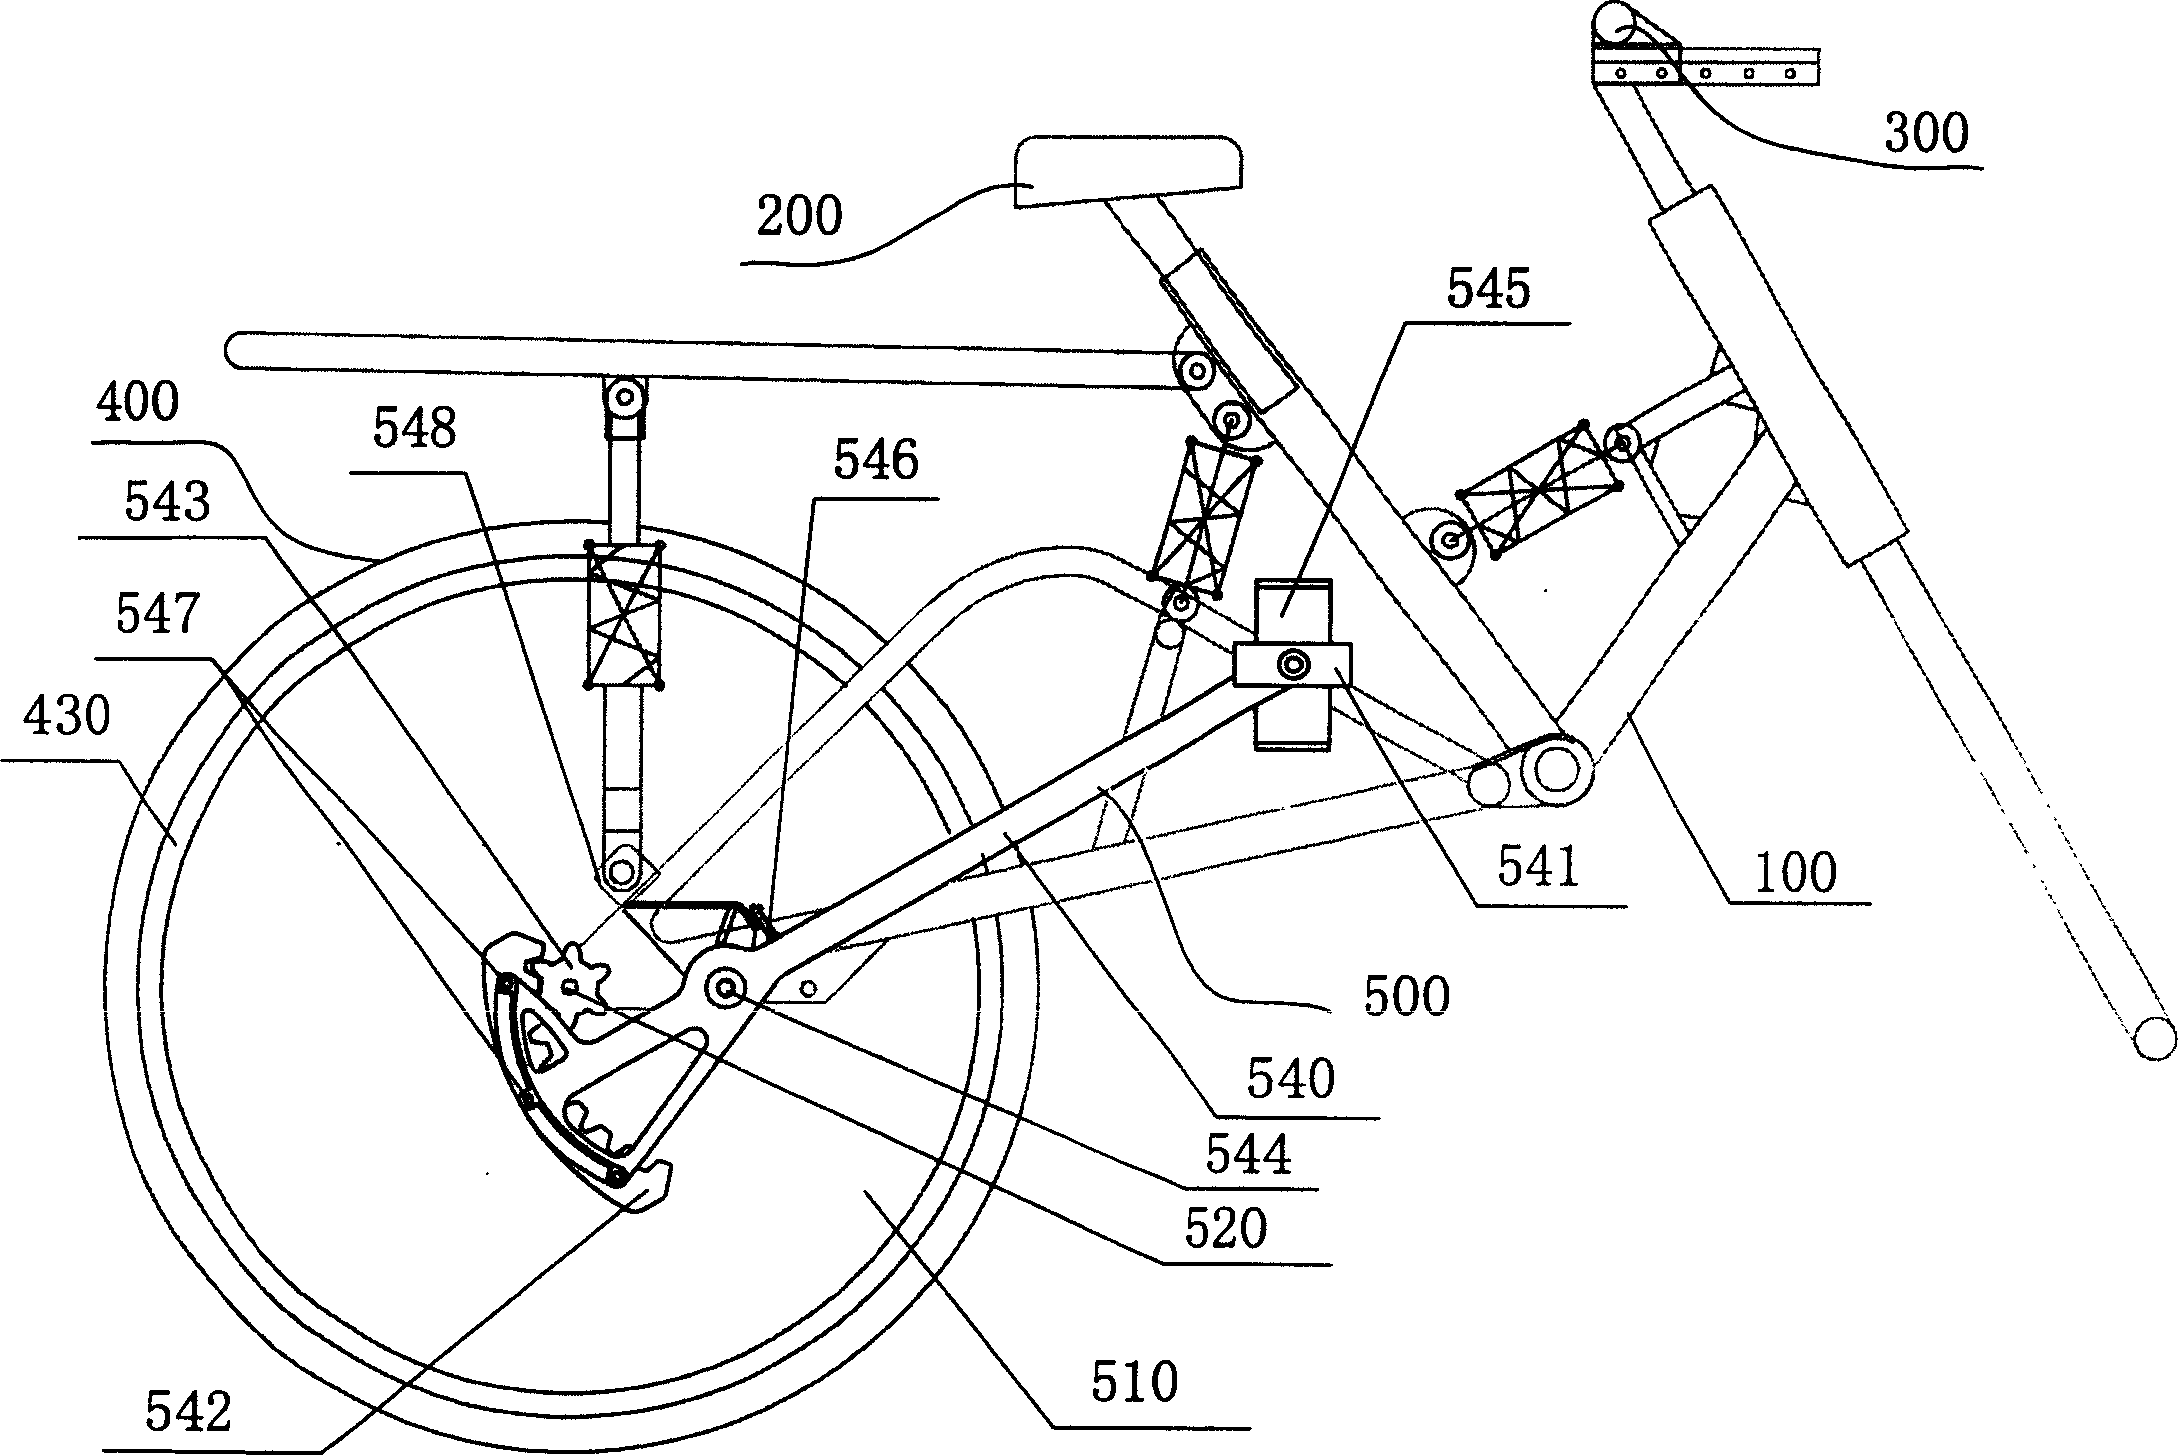 Reciprocating stepping type power-assisted bicycle